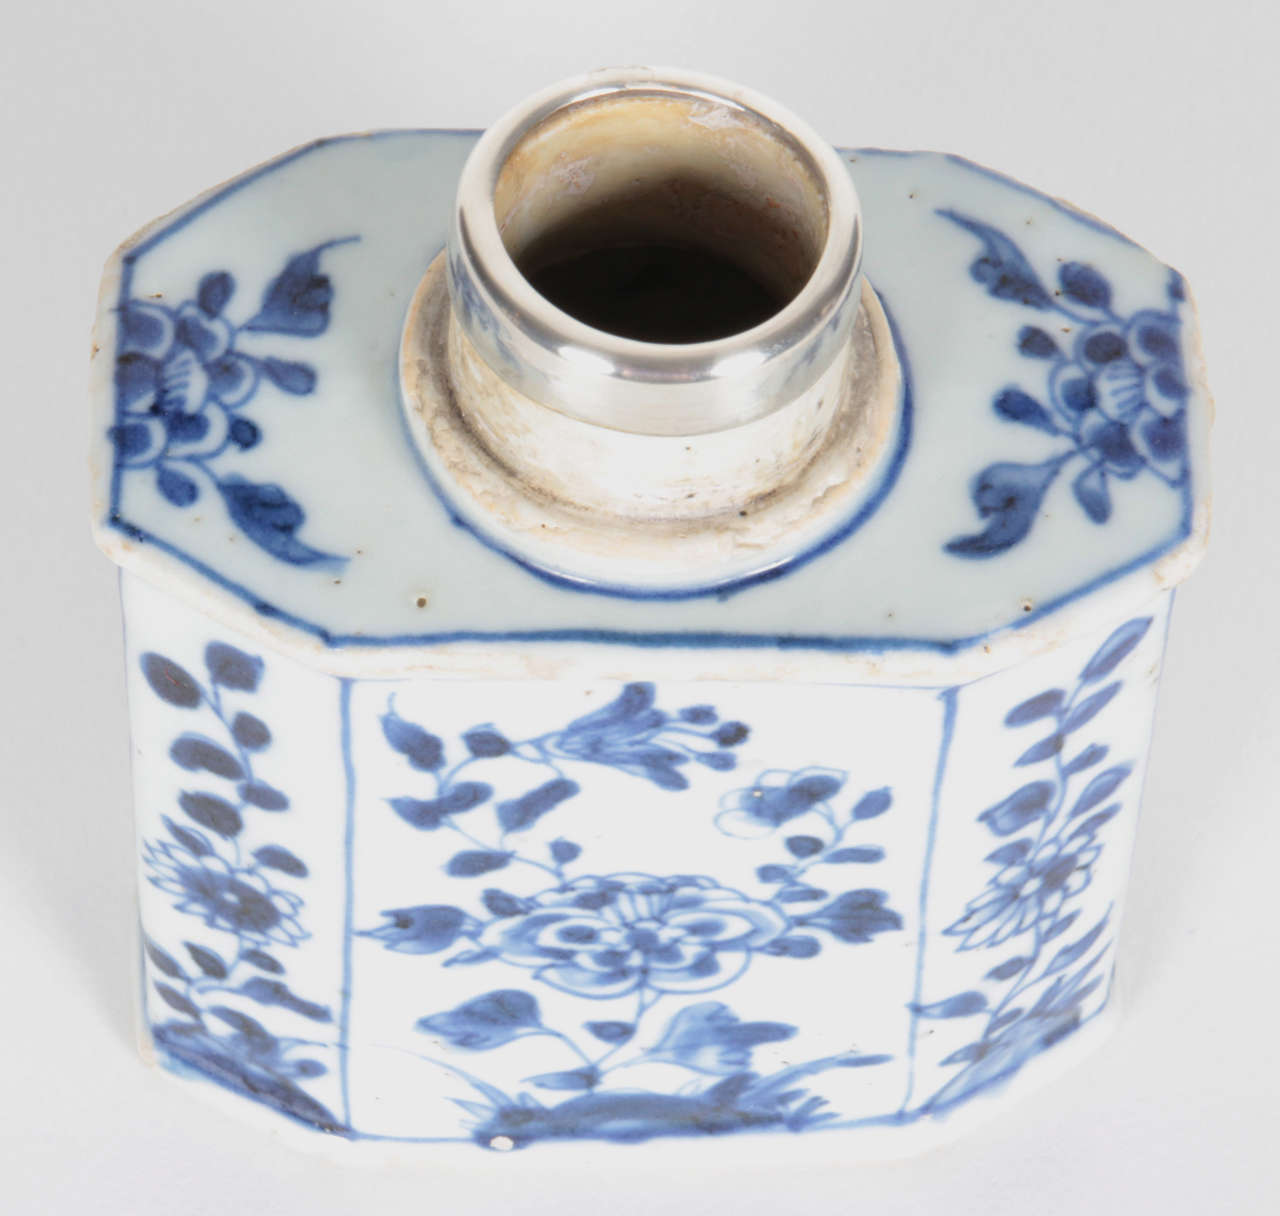 Porcelain Chinese Export Tea Caddy with Silver Mount